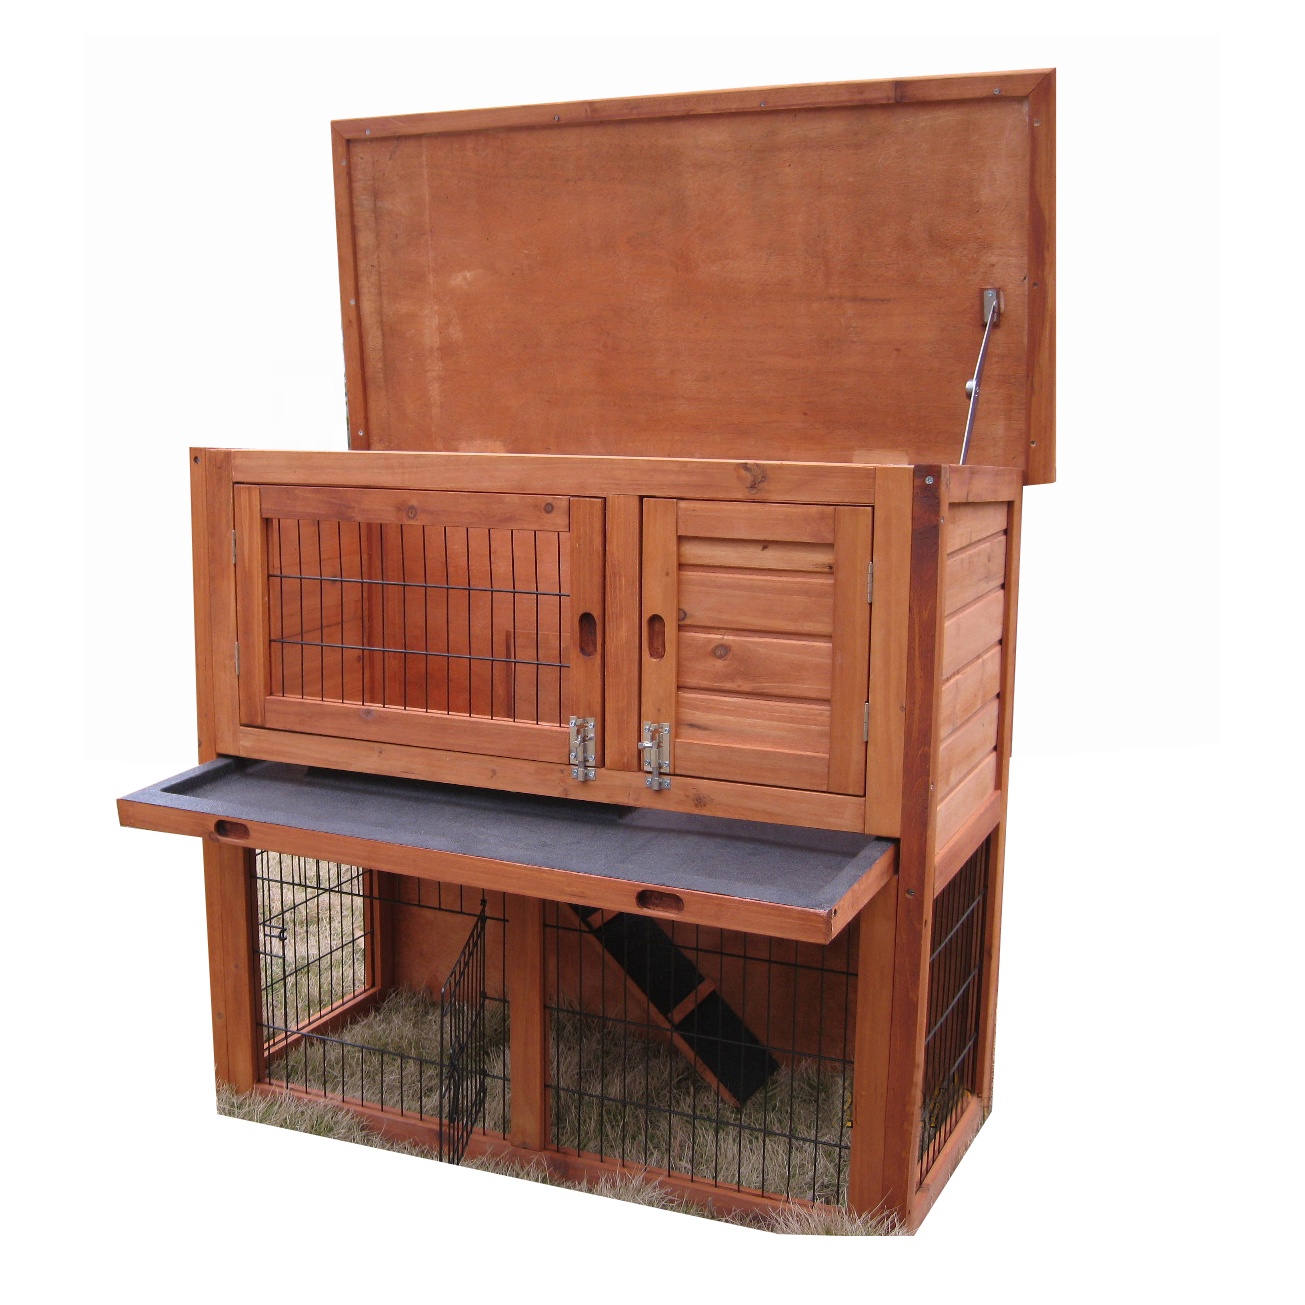 Factory wholesale Dog Flight Carrier -
 Factory Outdoor Wooden Indoor Rabbit Hutch Elevated Cage Habitat with Enclosed Run Wheels Ideal Rabbits Guinea Pig home – Easy